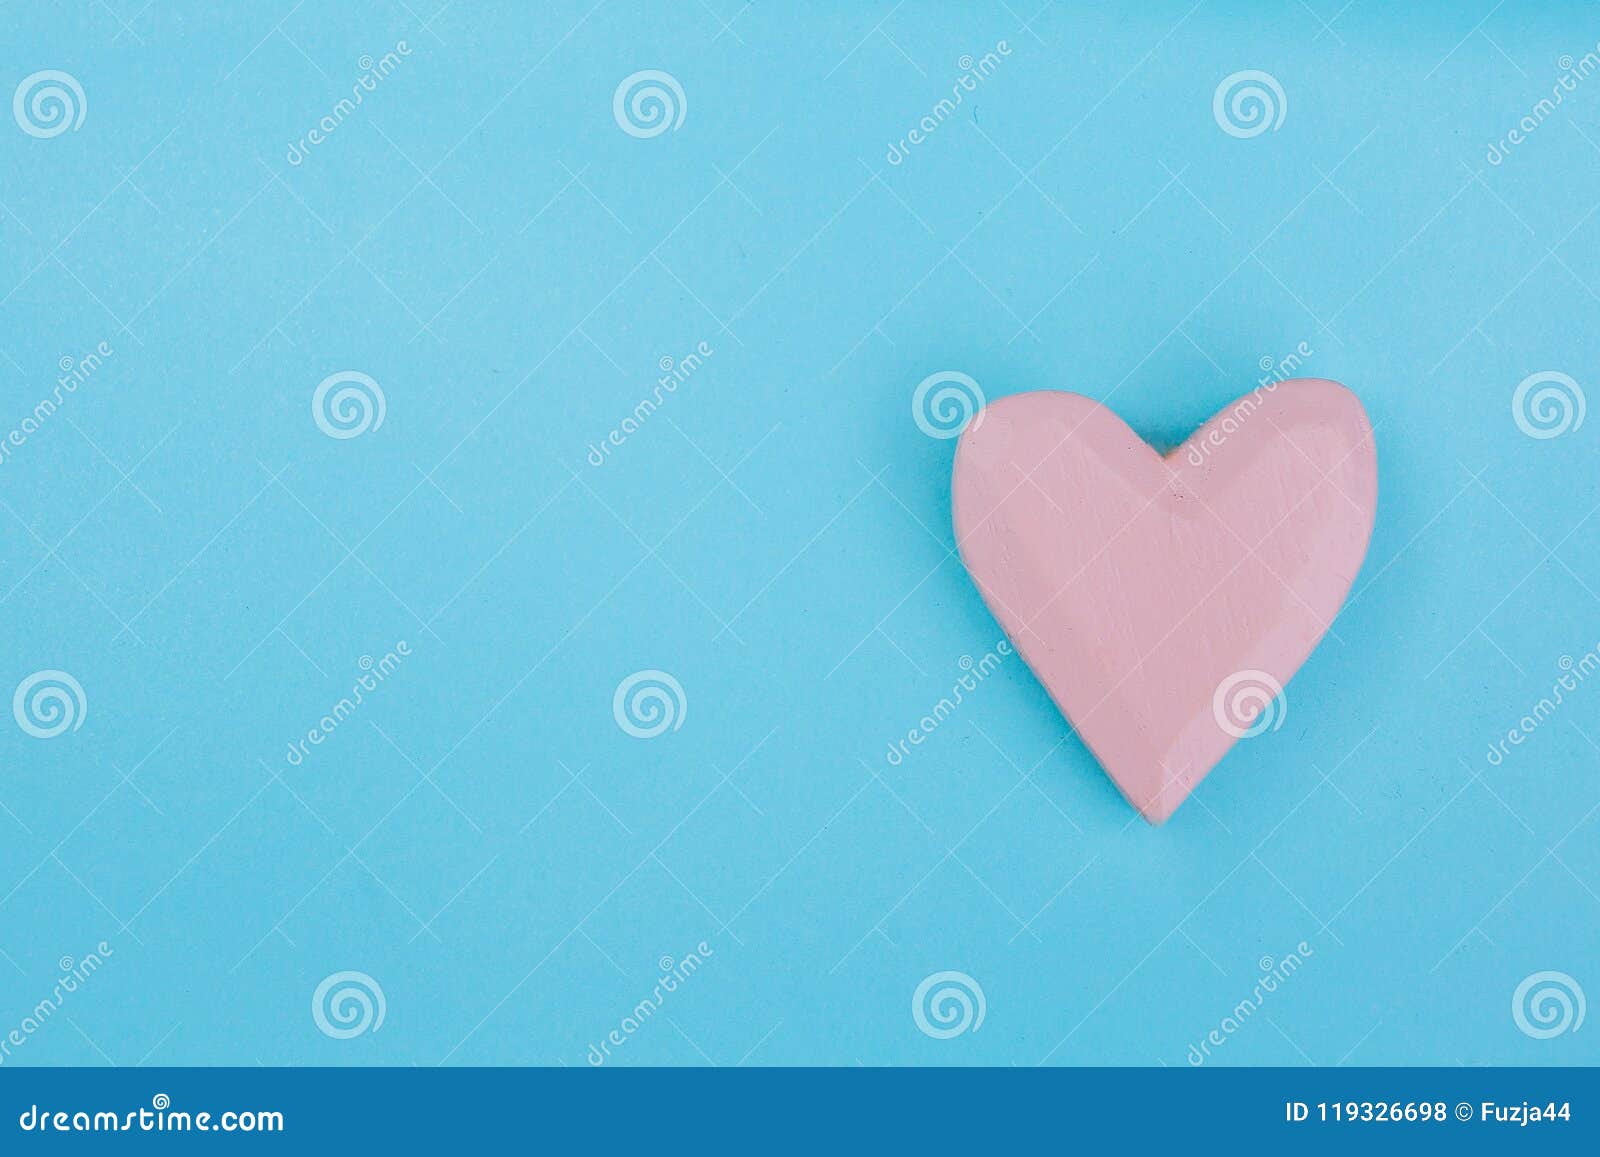 Patterns And Designs Of Green Wooden Heart On Blue Background With